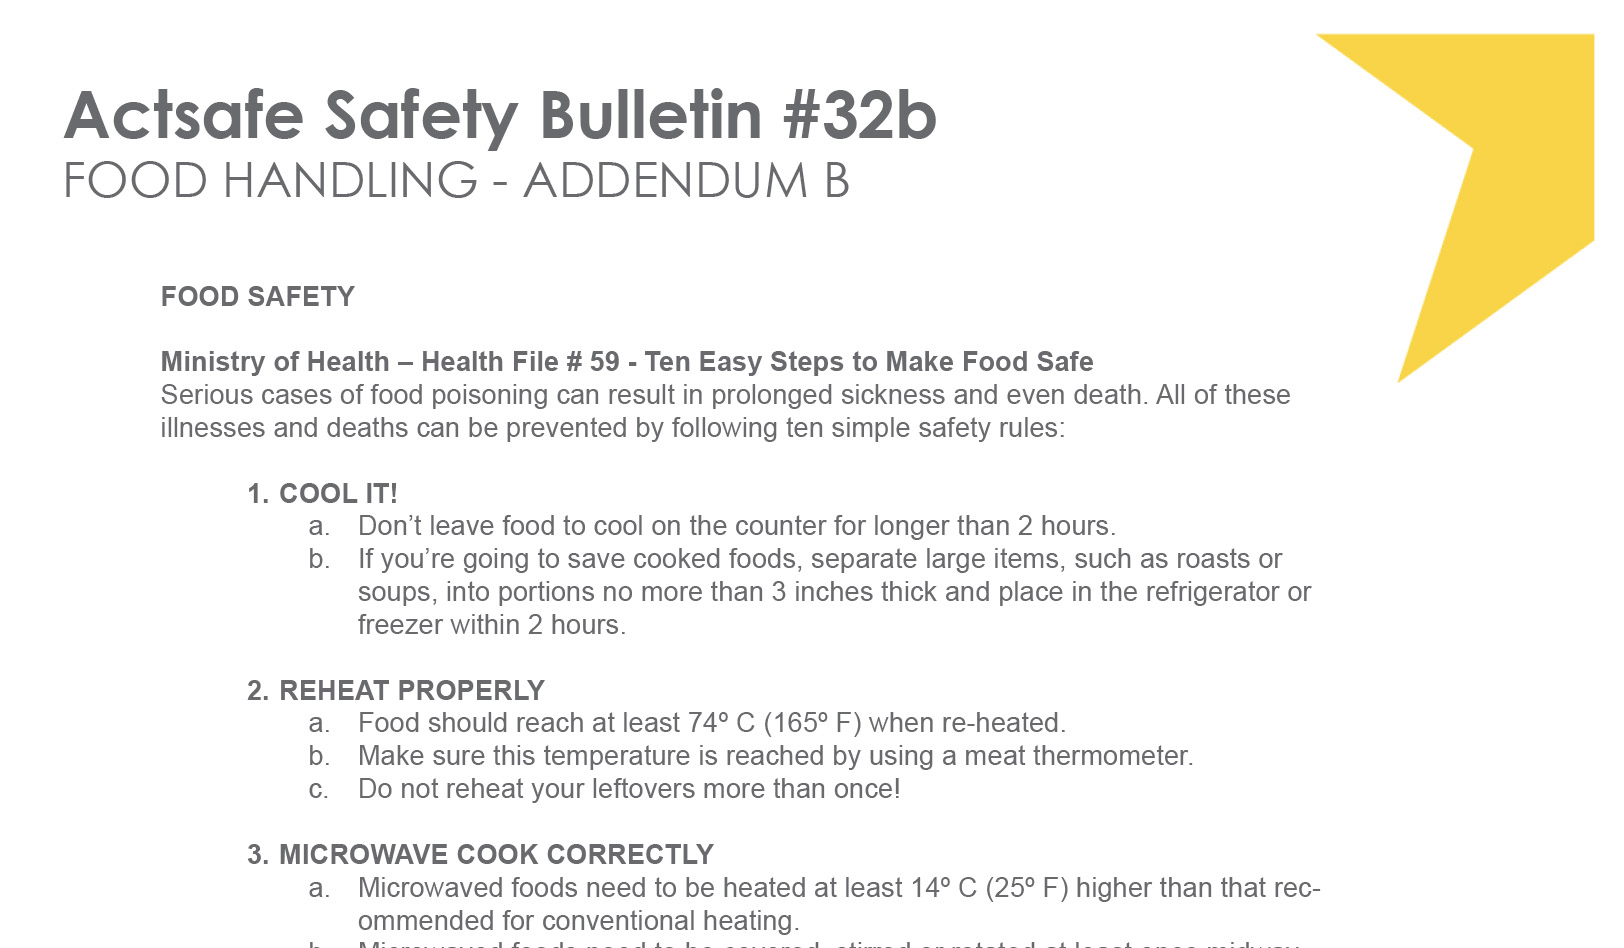 #32B Addendum “B” for Food Handling – Ministry of Health File #59 Motion Picture Safety Bulletin